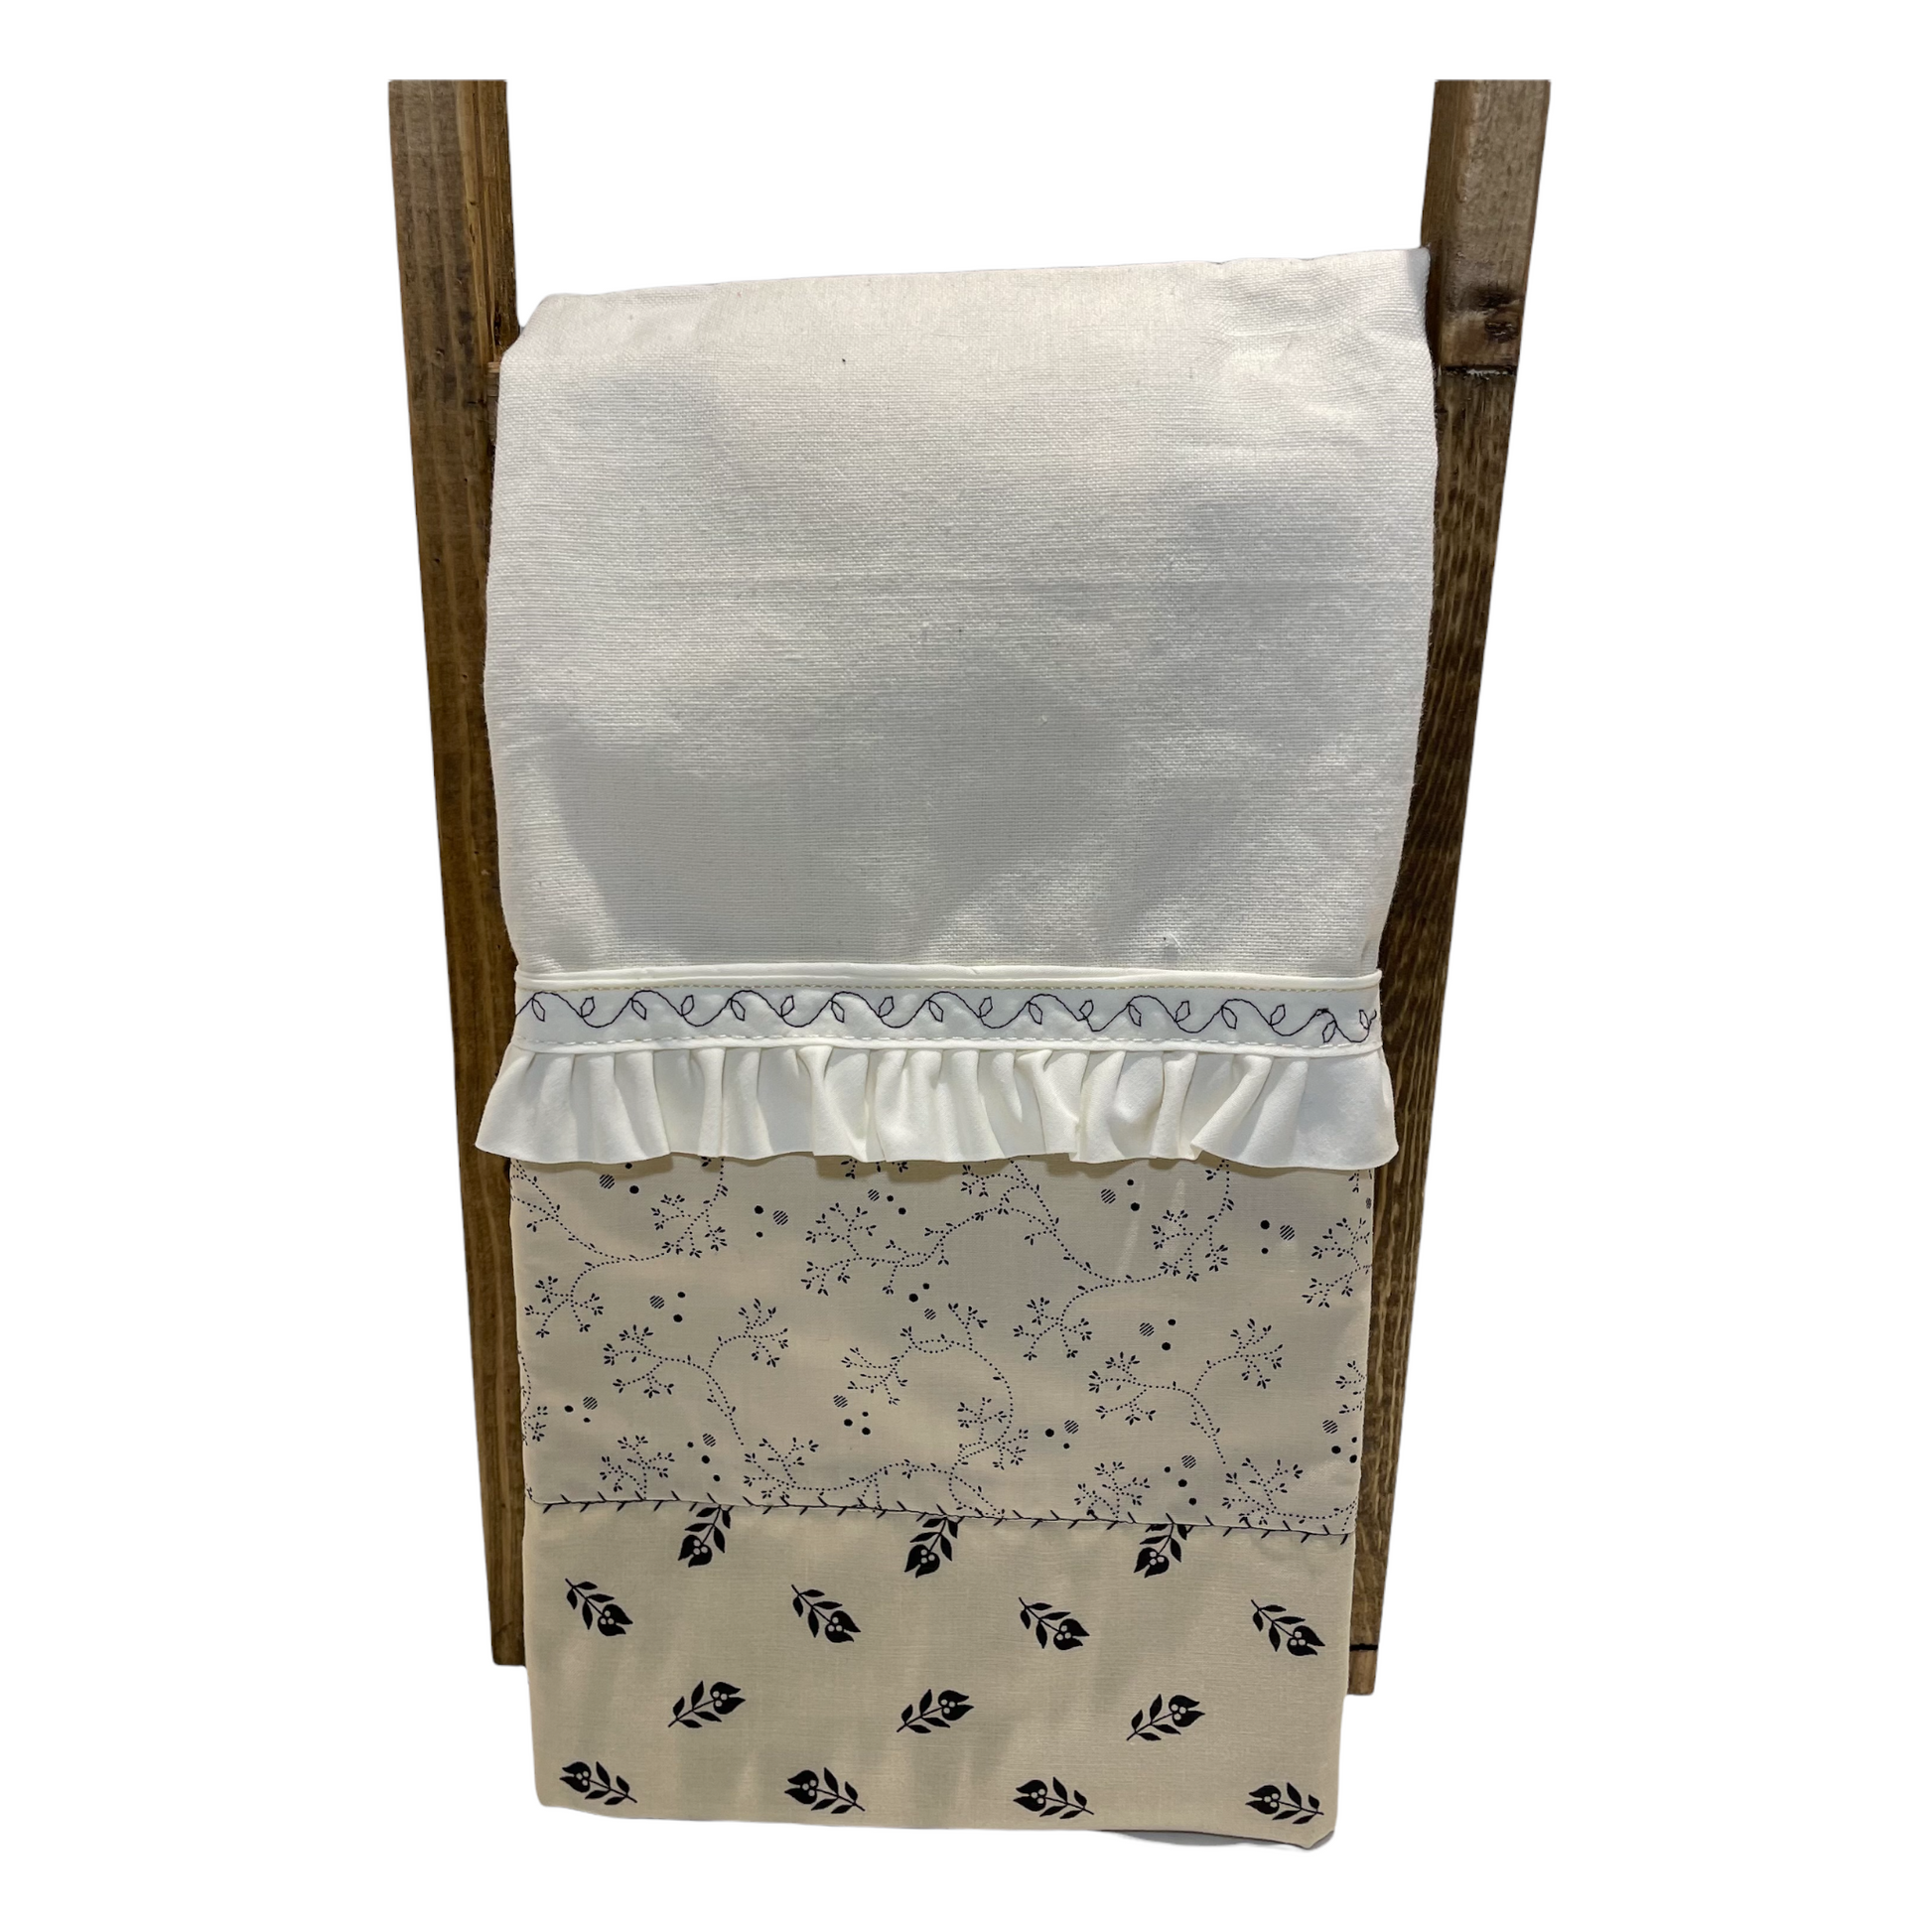 Handcrafted in Canada Farmhouse Style Dish Towel with black flowers on a beige cotton towel and embroidery details.  Purchase this product or learn to make your own on the Home Stitchery Decor YouTube Channel.  Part of a coordinating product line. 